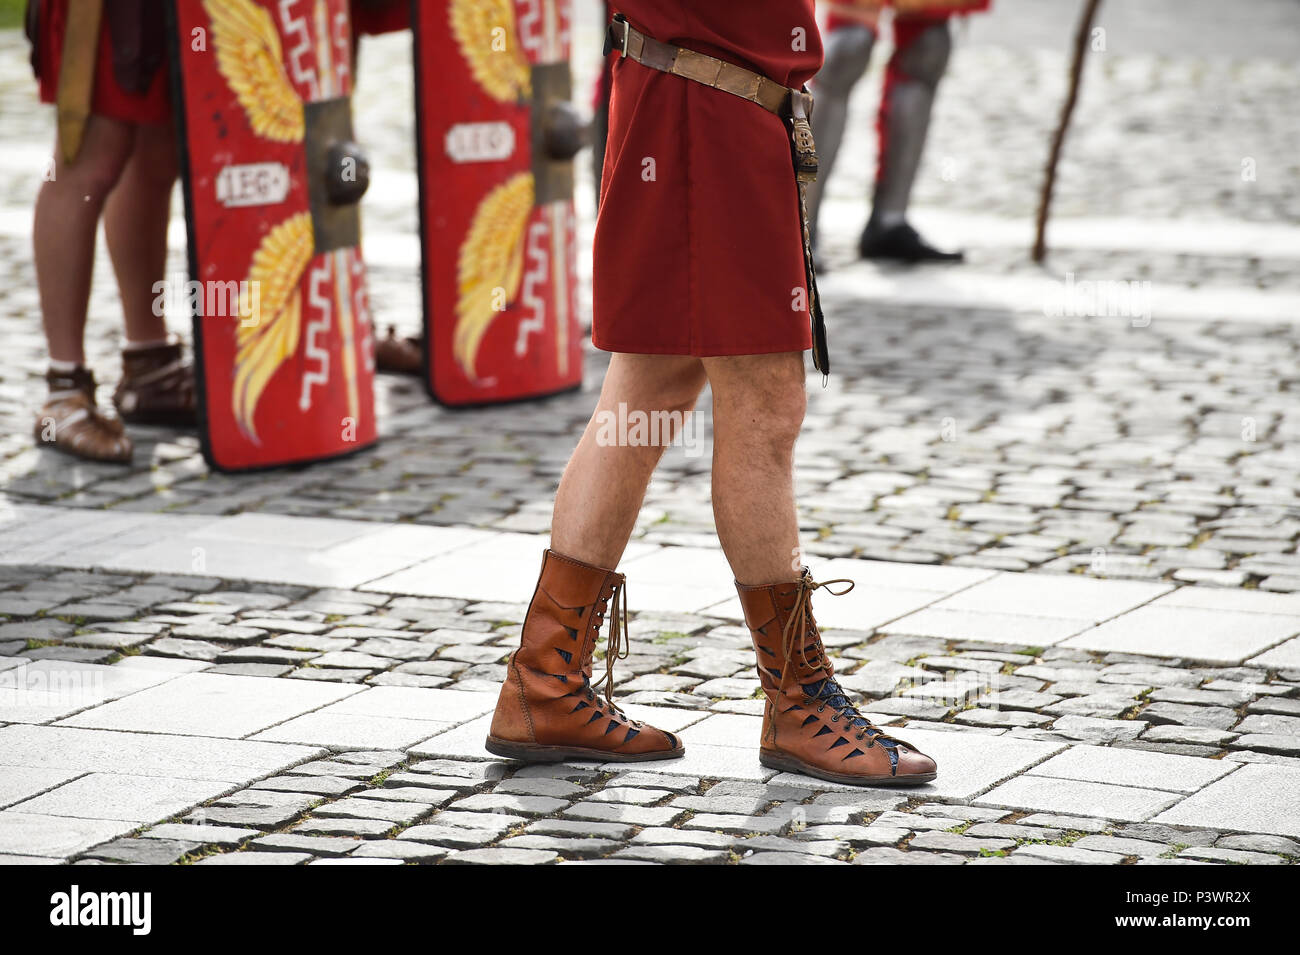 Reenactment detail with roman soldiers uniforms Stock Photo